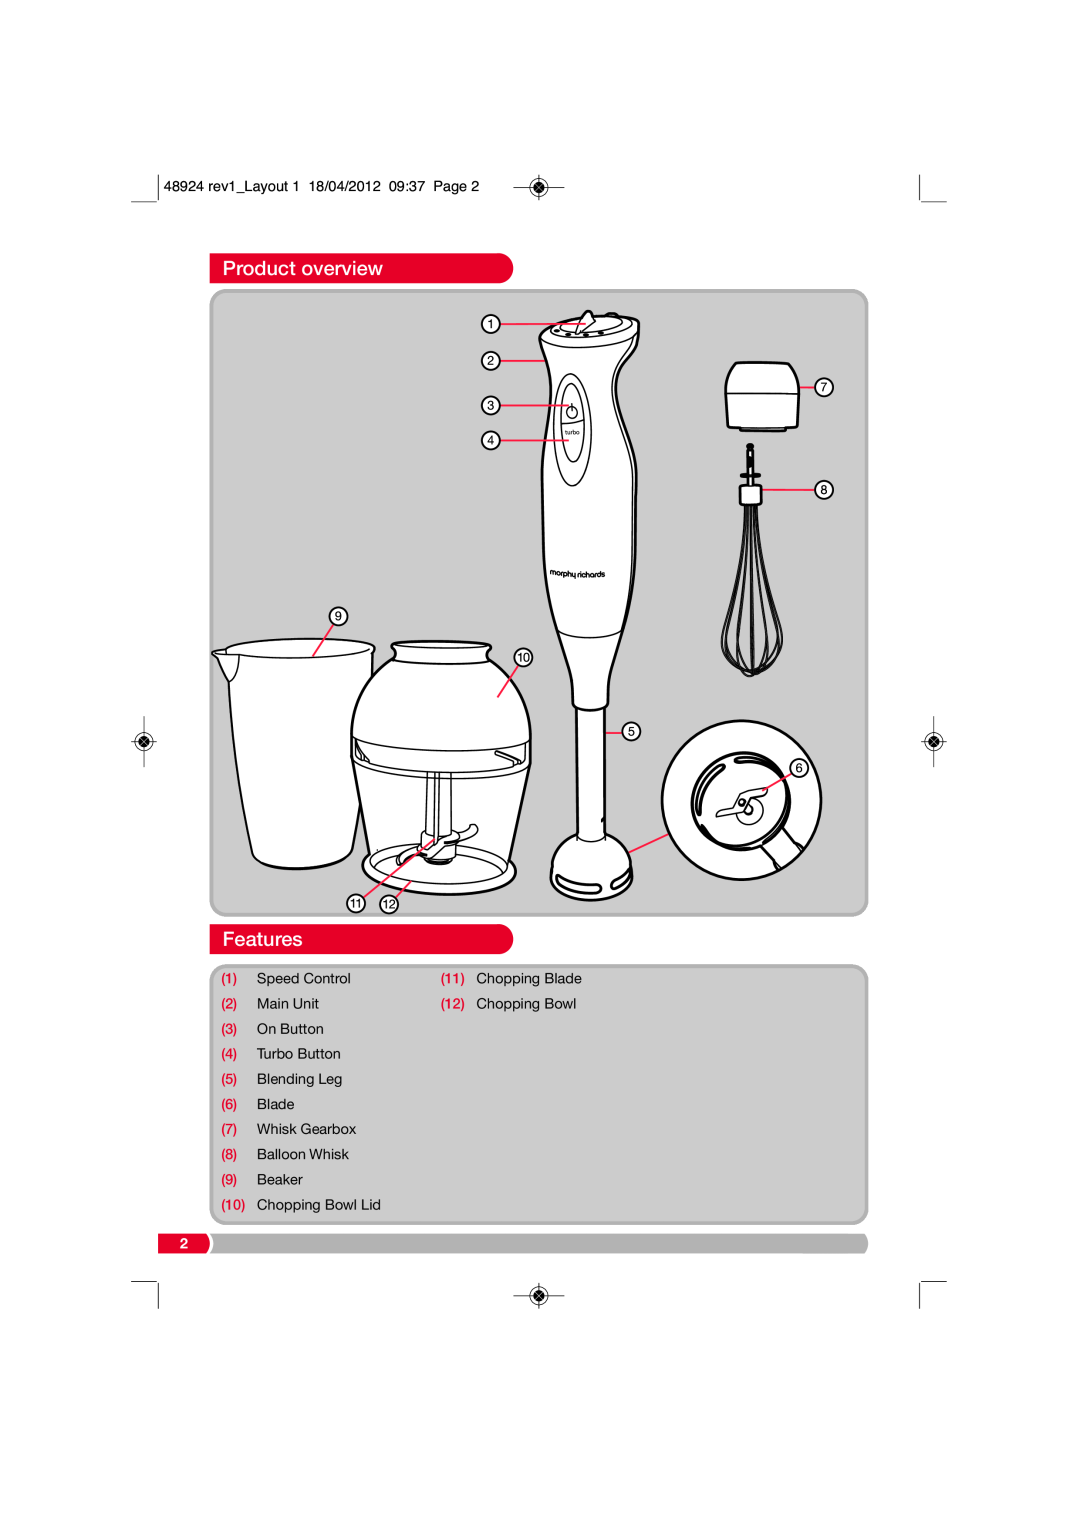 Morphy Richards 48924 manual Product overview, Features, Speed Control, Chopping Blade, Main Unit, Chopping Bowl 